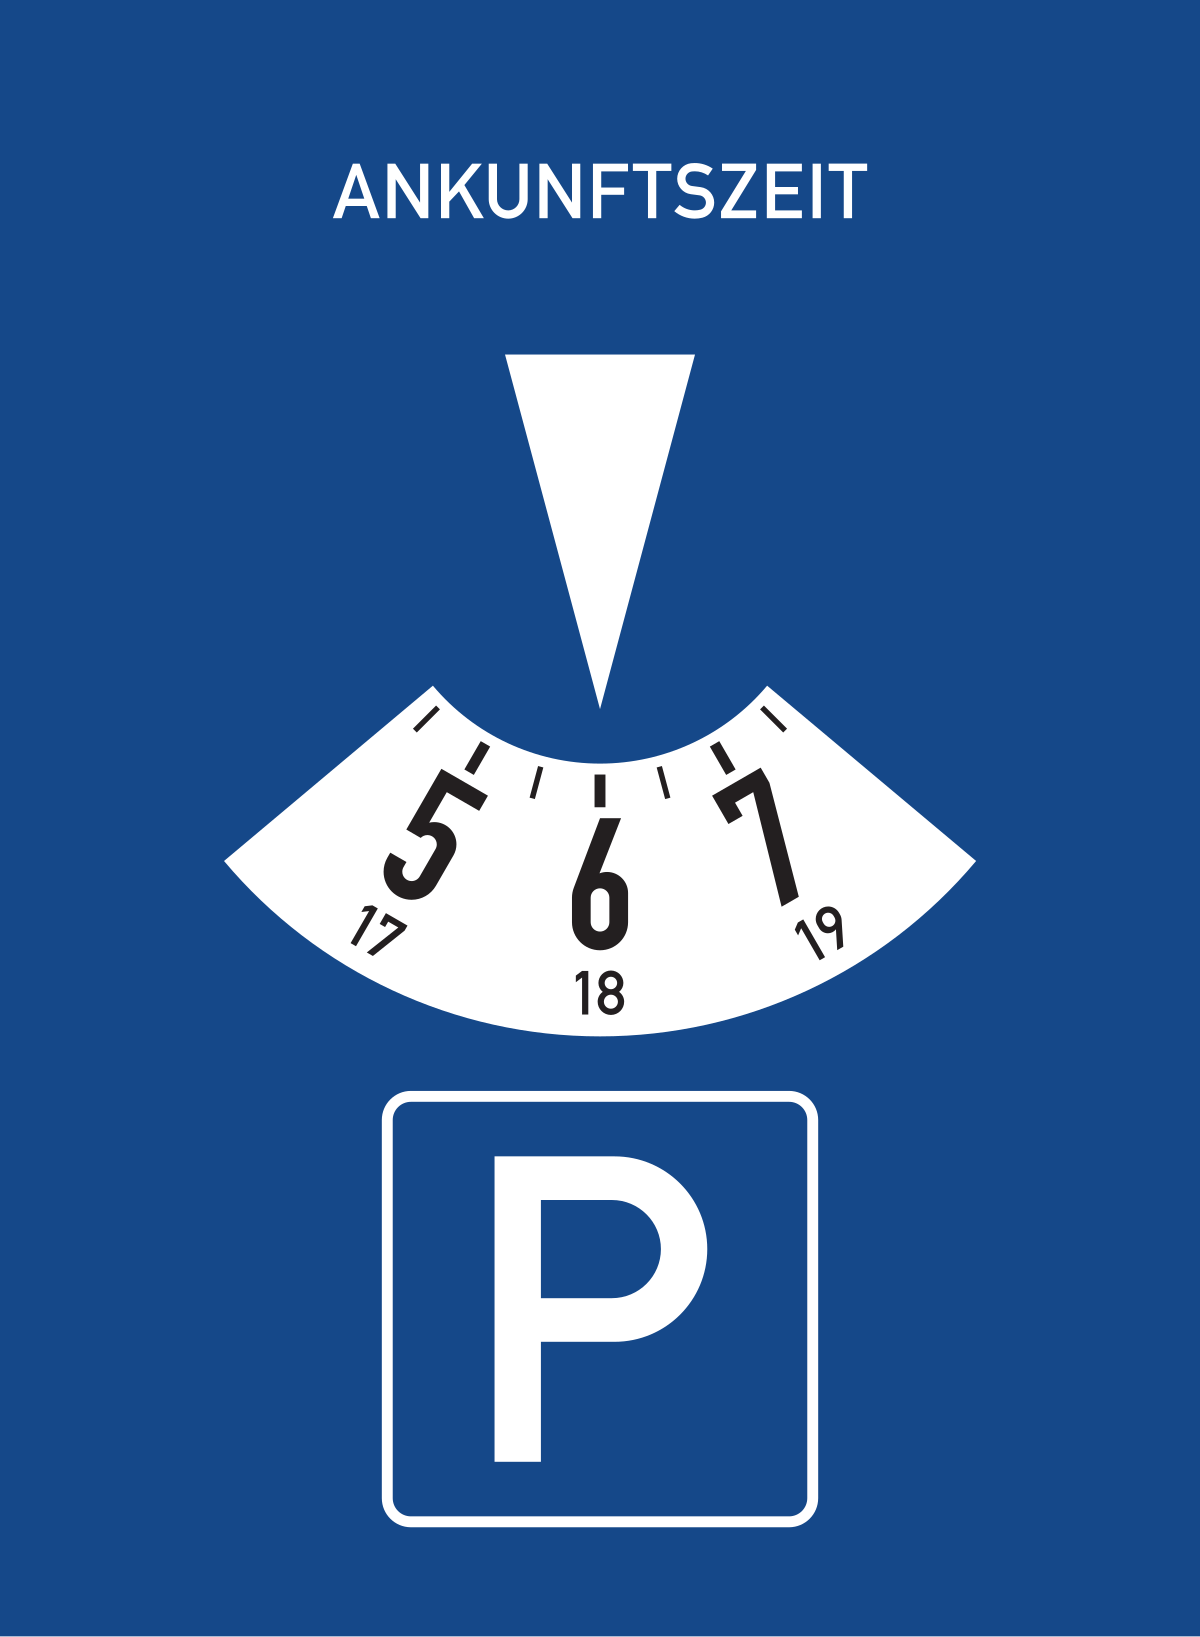 Beware! You can be fined if you don't use the correct parking disk